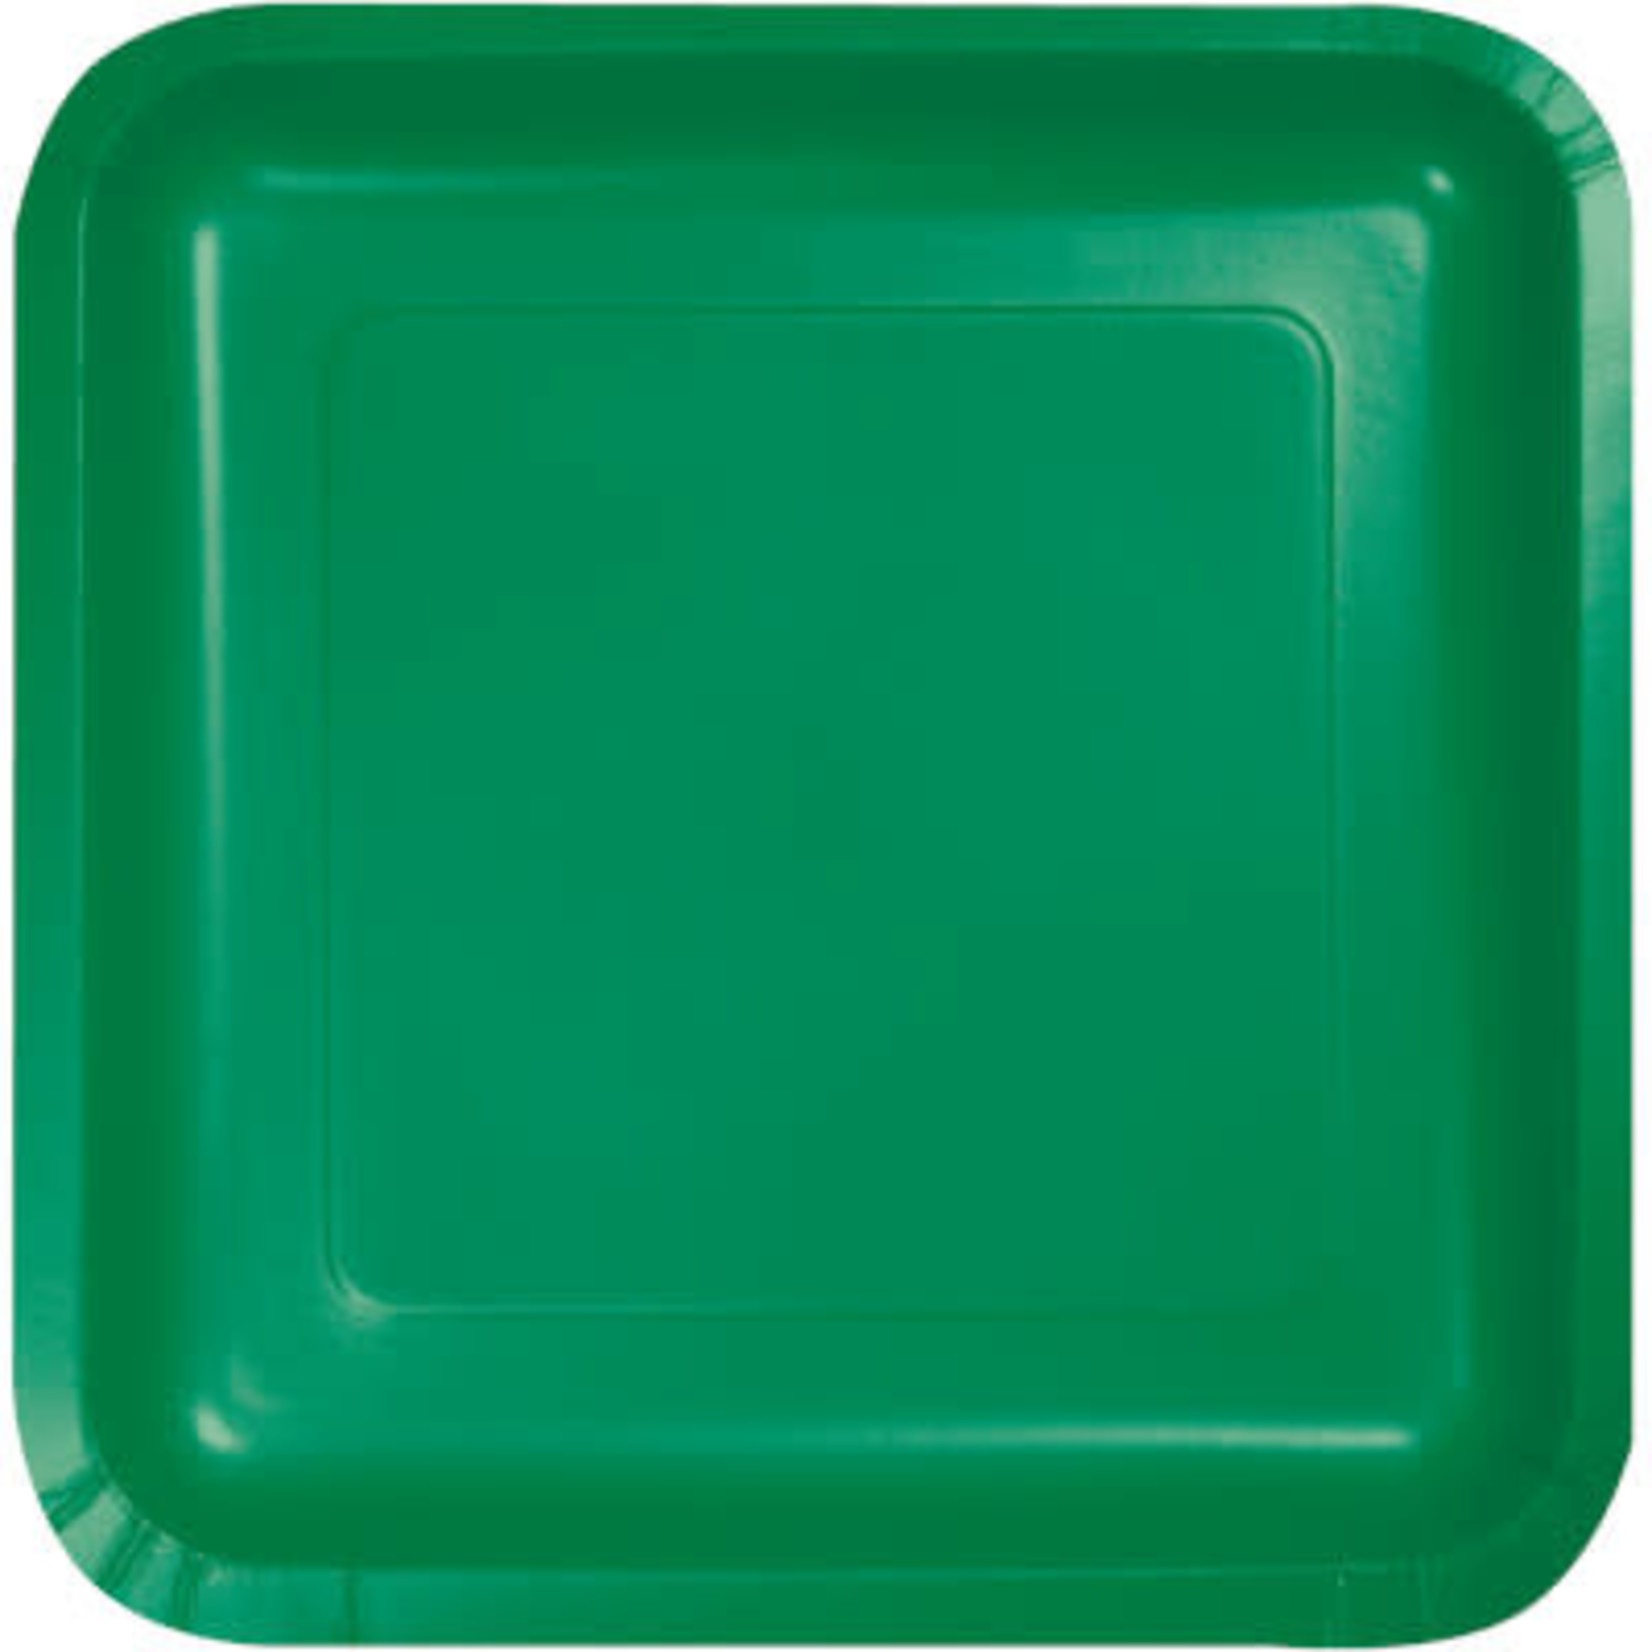 Touch of Color 7" Emerald Green Square Paper Plates - 18ct.